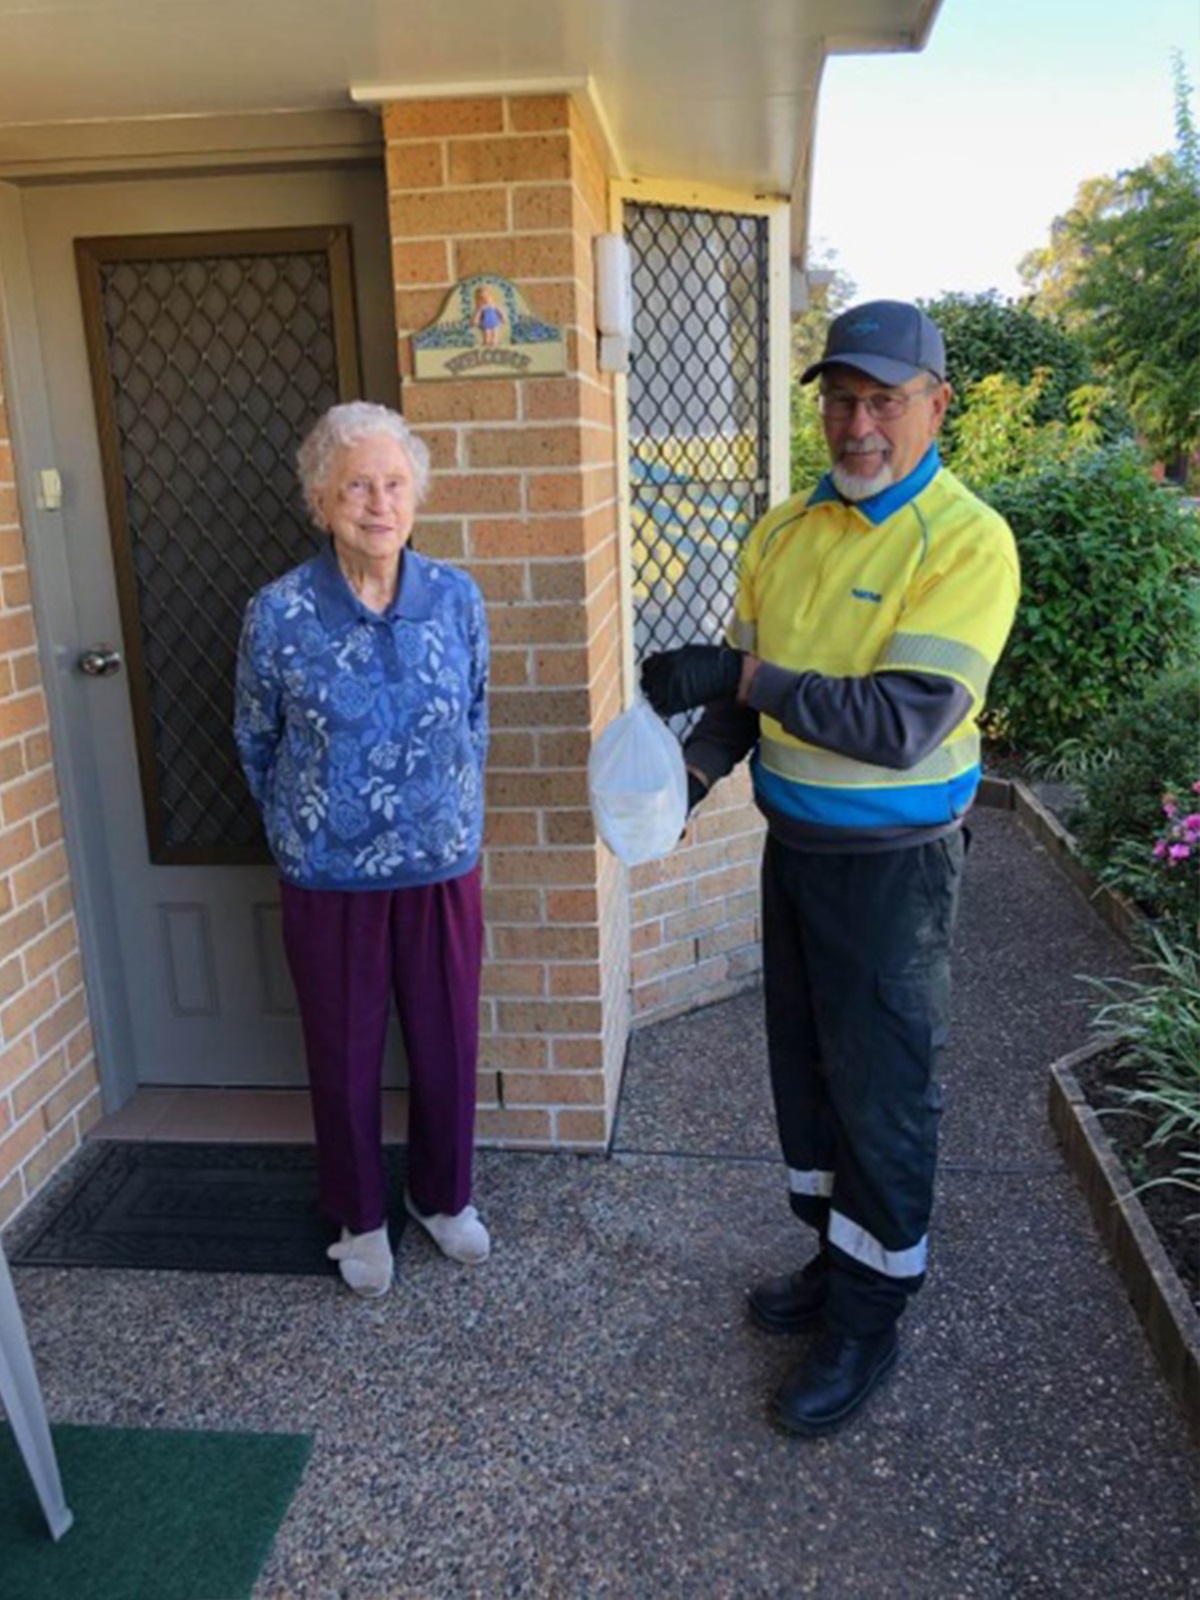 PLH NRMA Gary Piper delivering meals in partnership with Meals on Wheels NSW